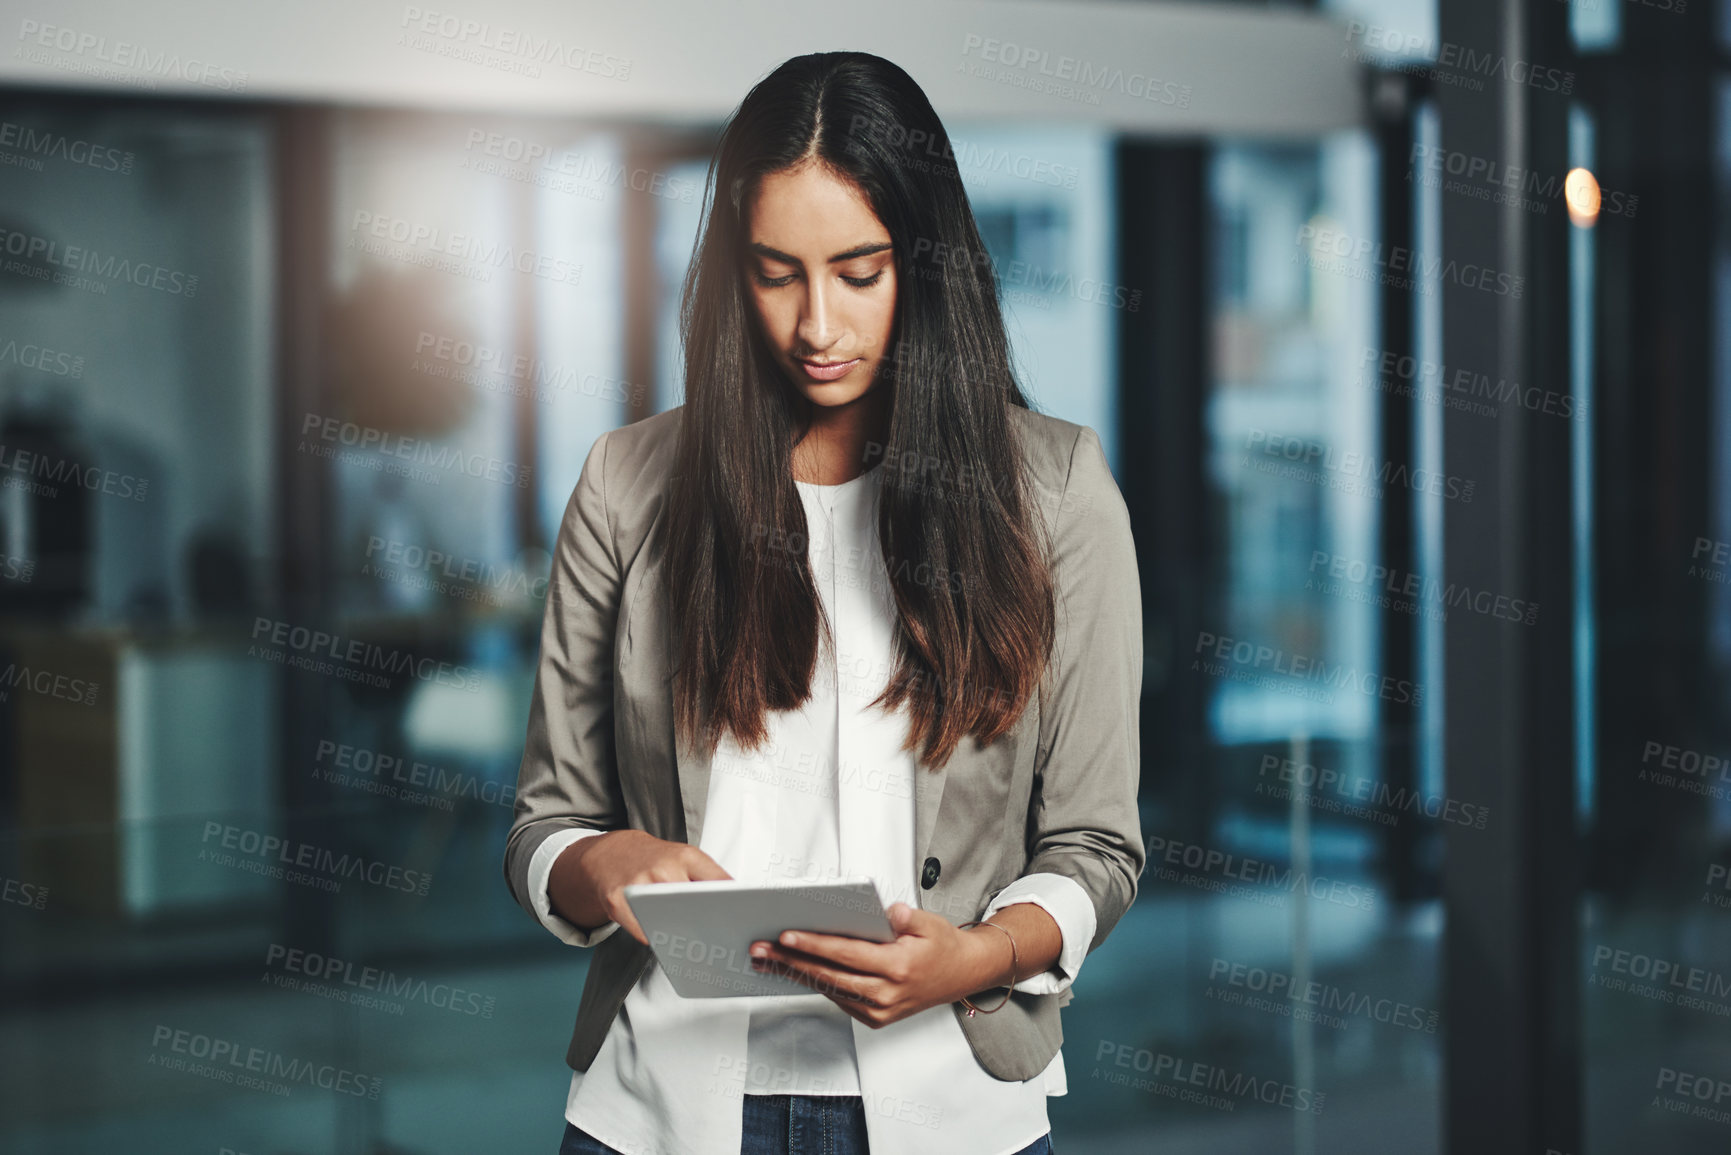 Buy stock photo Shot of a young businesswoman working on a digital tablet in an office